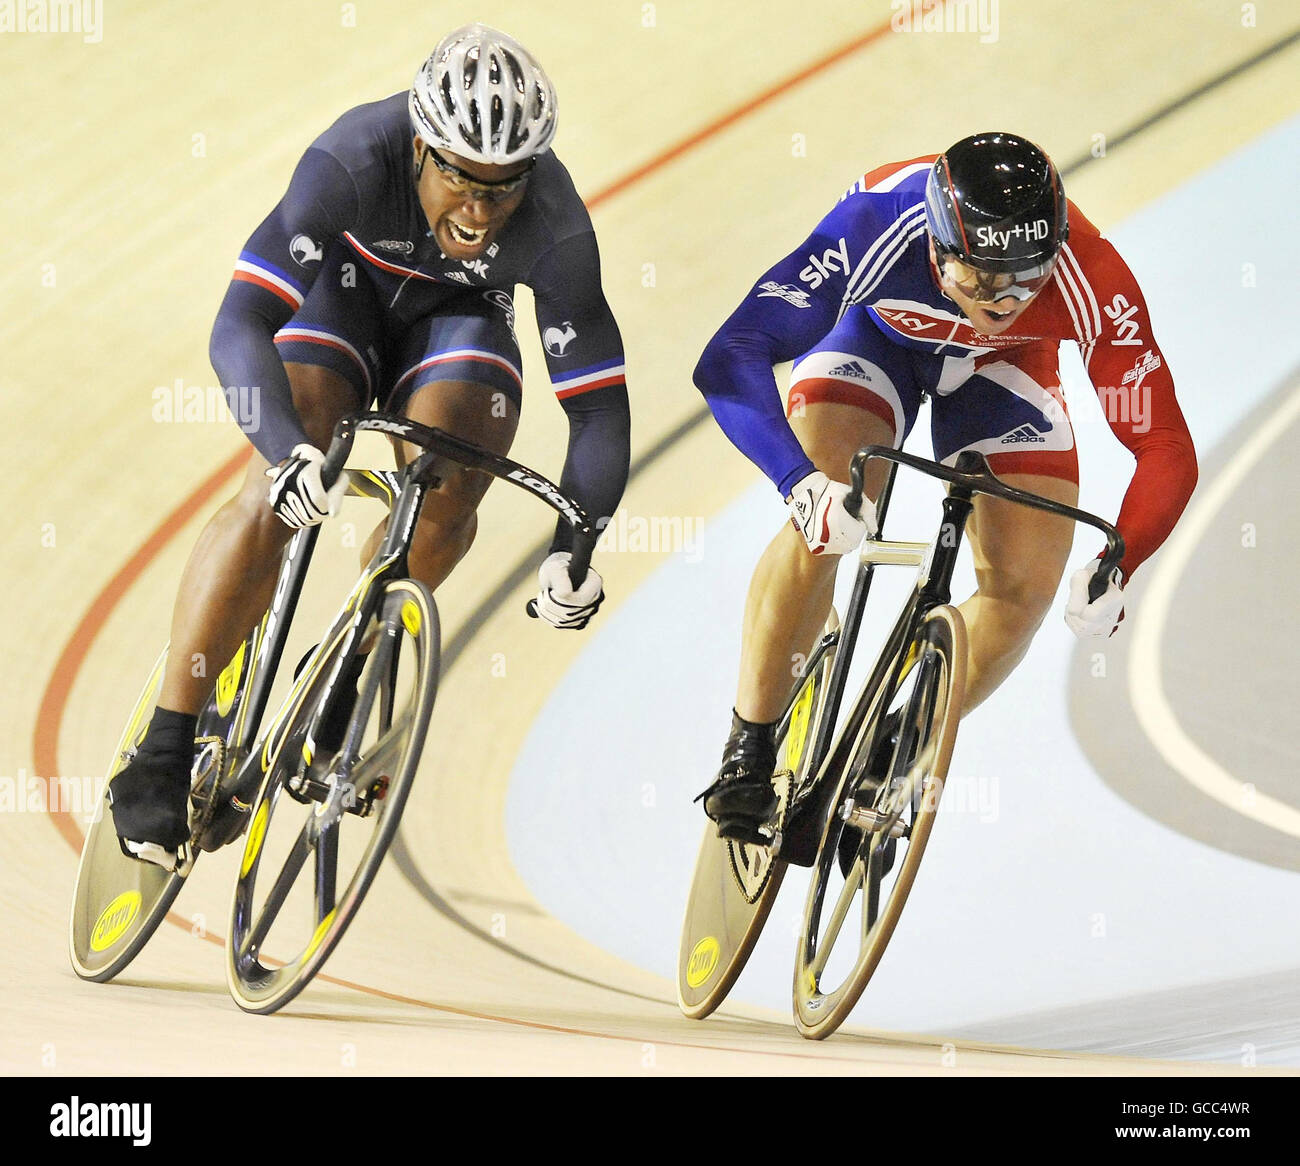 France's Gregory Bauge (left) rides to knock out Great Britain's Sir Chris Hoy in the sprint 1/4 final during the World Track Cycling Championships at the Ballerup Super Arena, Copenhagen, Denmark. Stock Photo